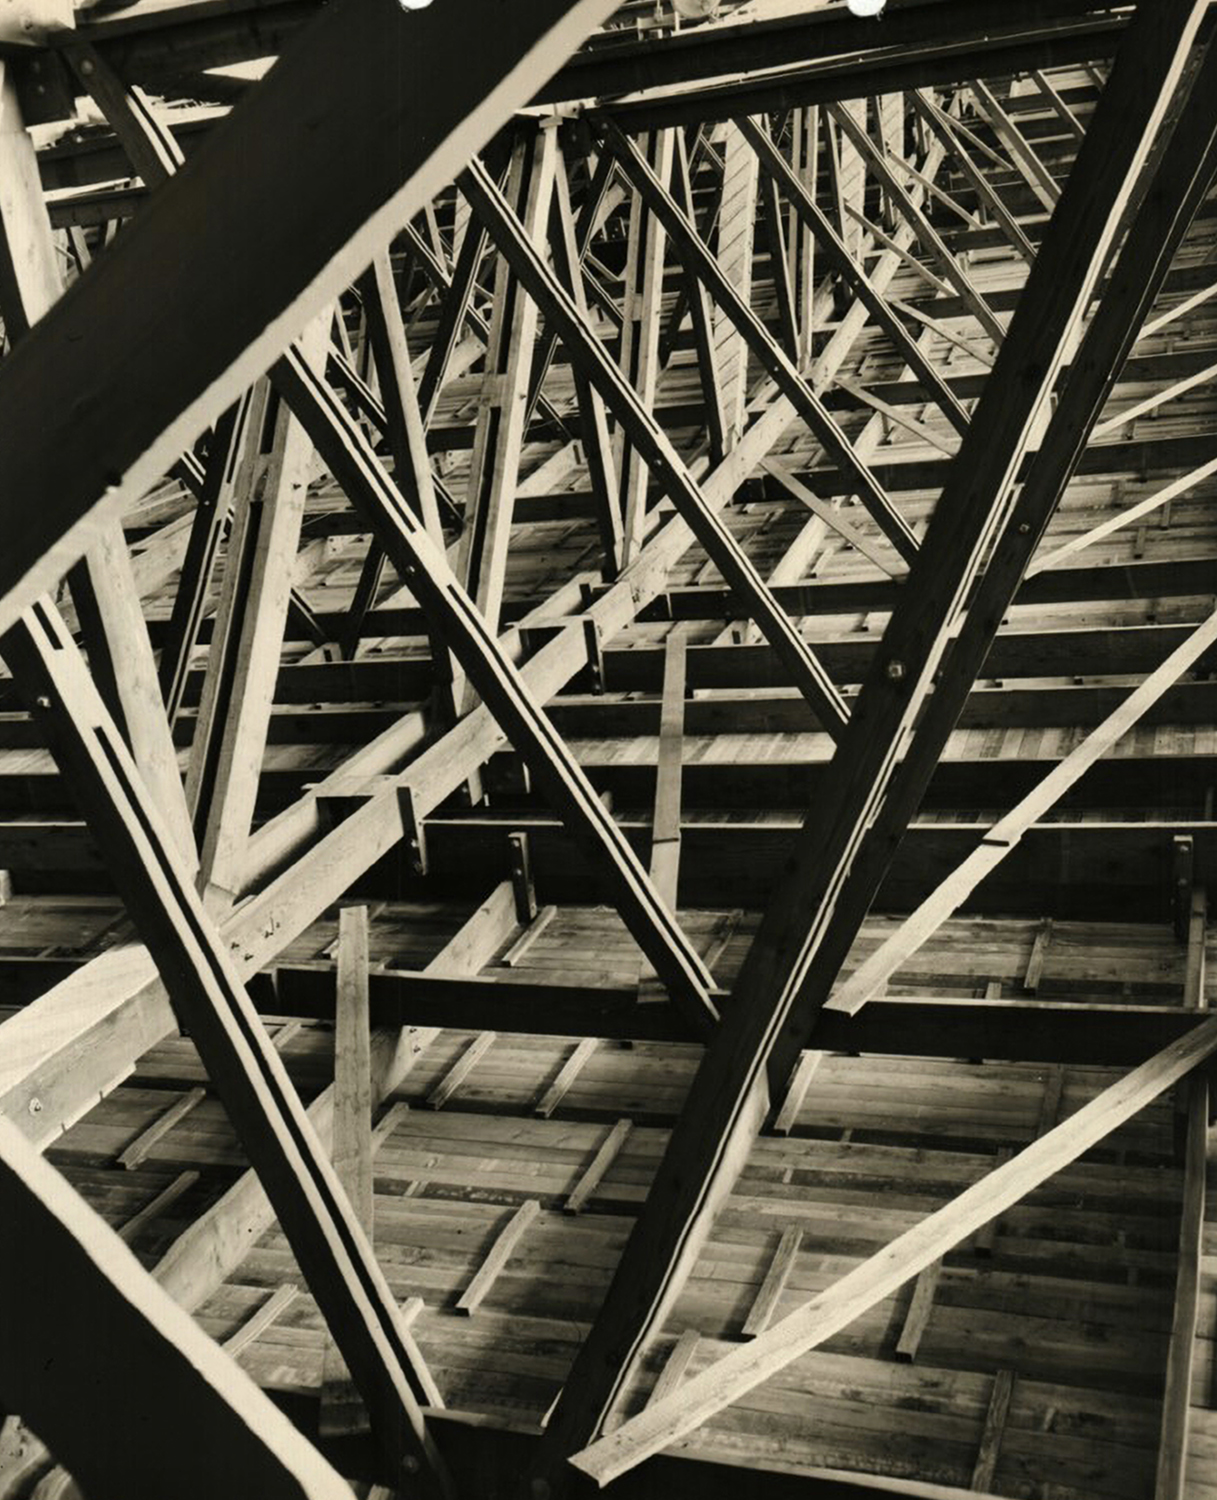 A close-up view of the damaged condition of the wood trusses and the wood roof planks inside Hangar 3.